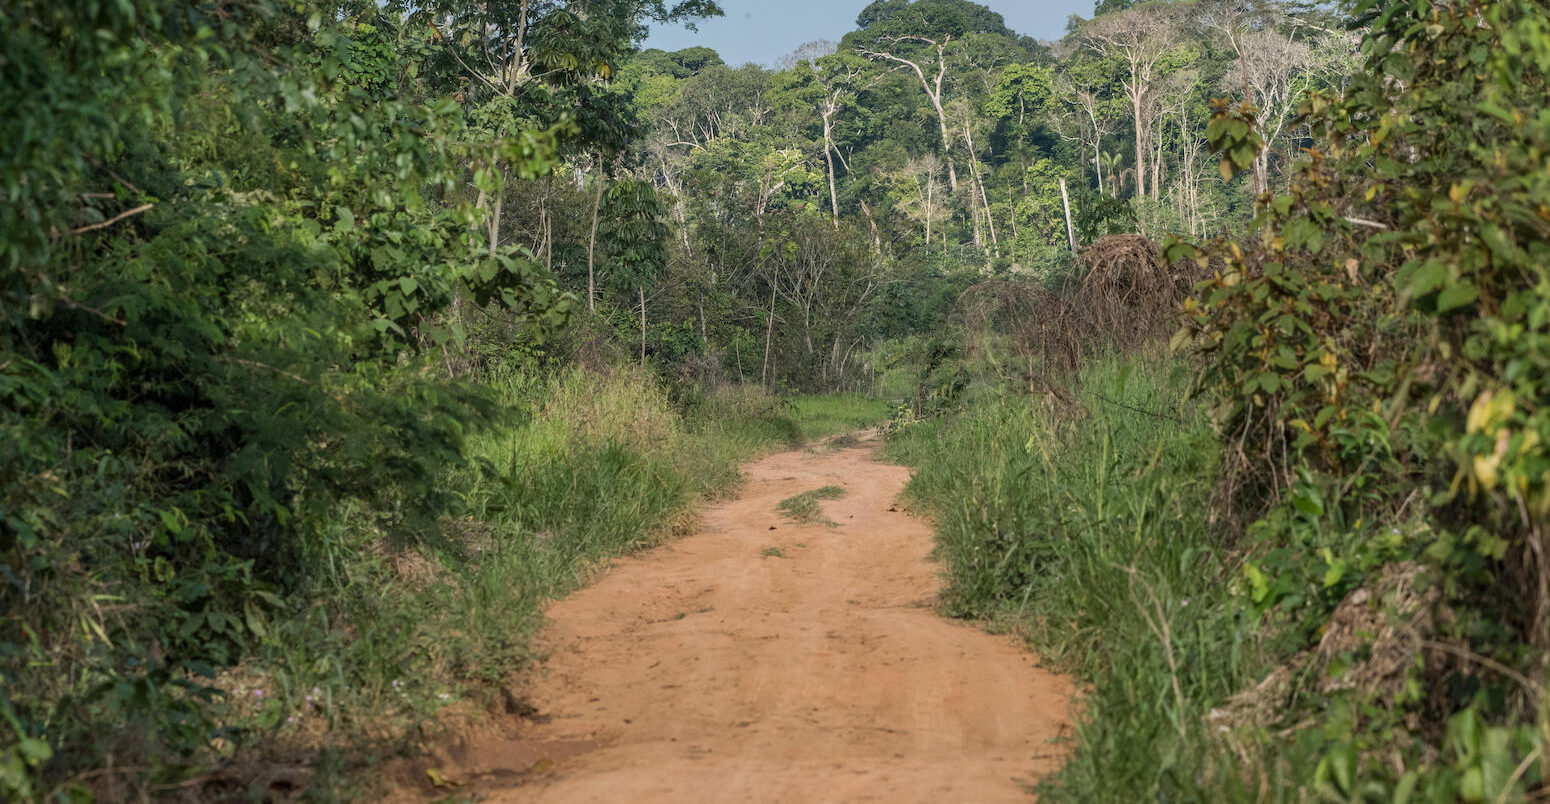 A road leading through secondary forest in Madre de Dios, Peru.